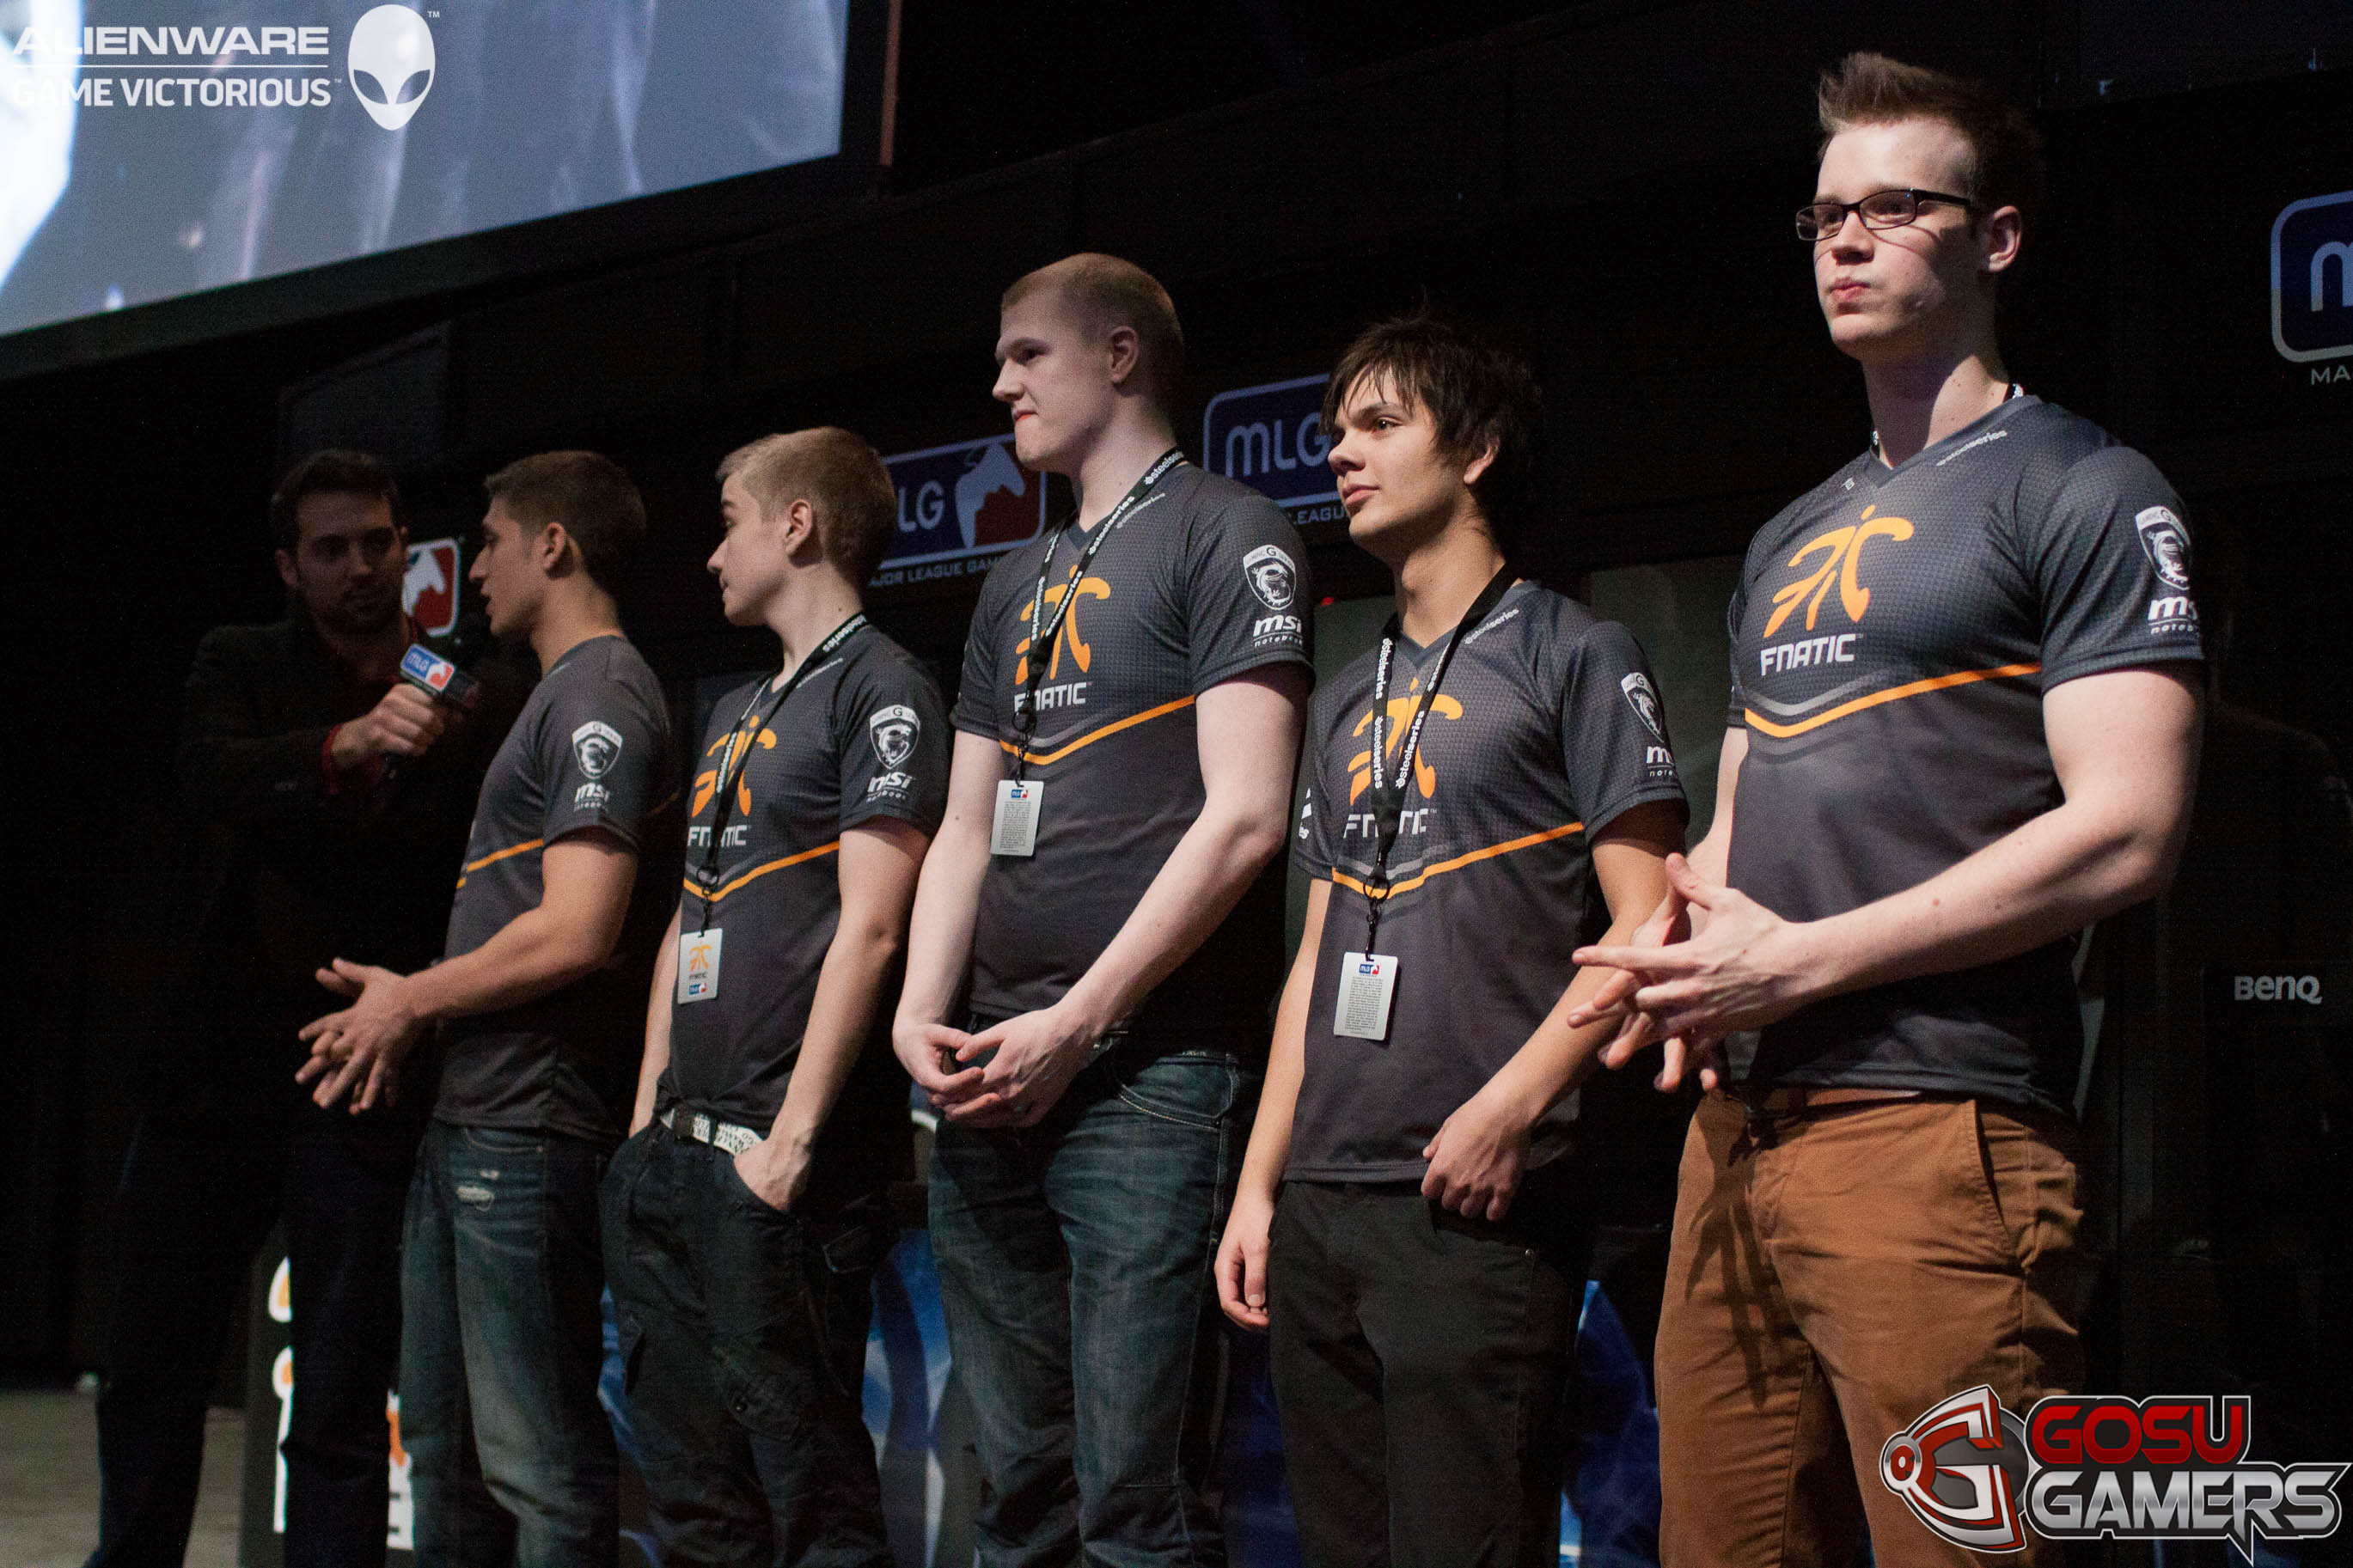 DotA2 blog : Valve's response to the Fnatic situation.